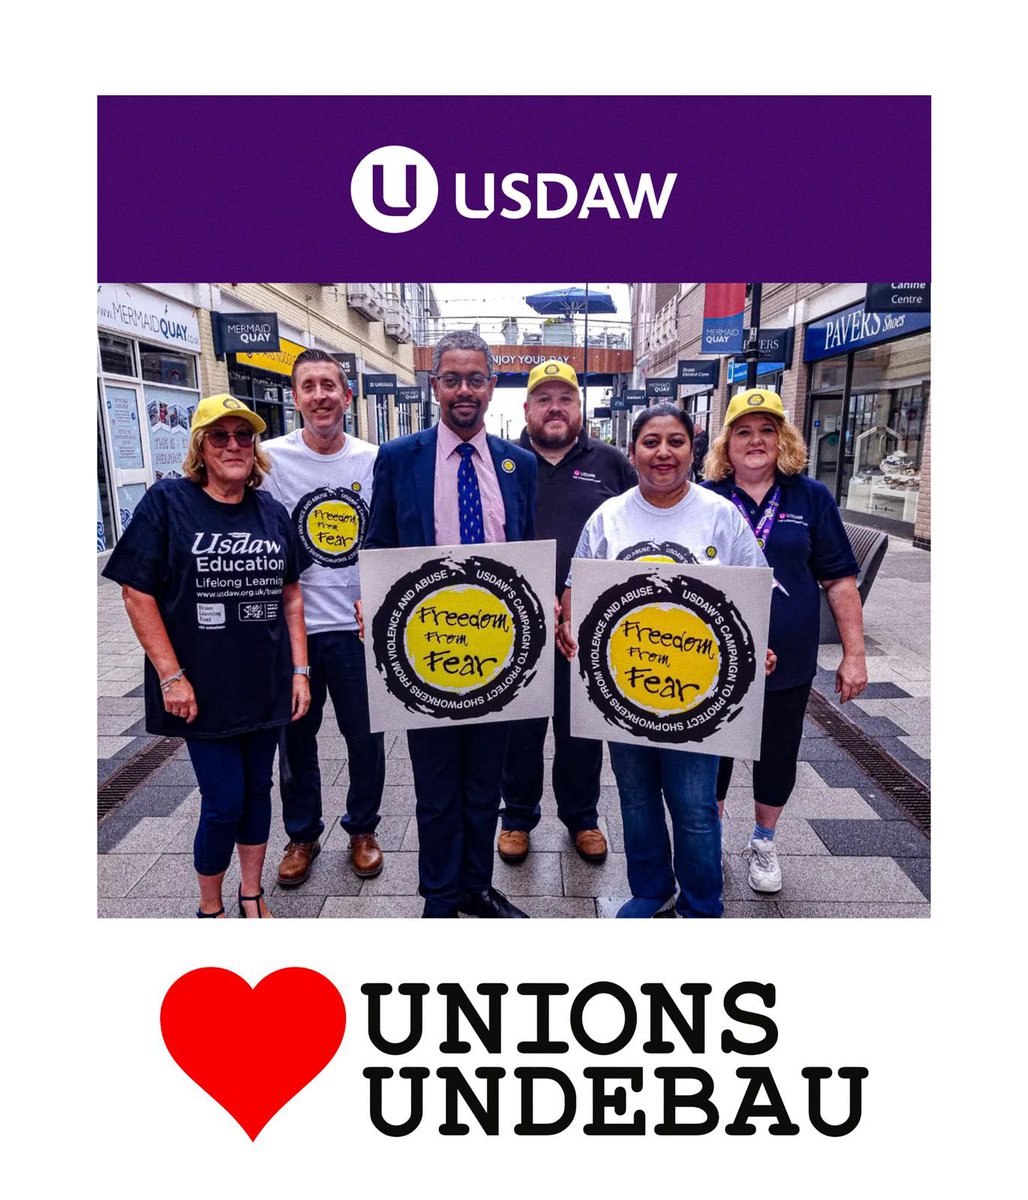 Workers deserve to be treated with respect, to feel safe in the workplace. @UsdawUnion ensure the voices of their members are heard across the industry, at every level, as we've seen with vital campaigns like Freedom From Fear. #JoinAUnion this #HeartUnions week.